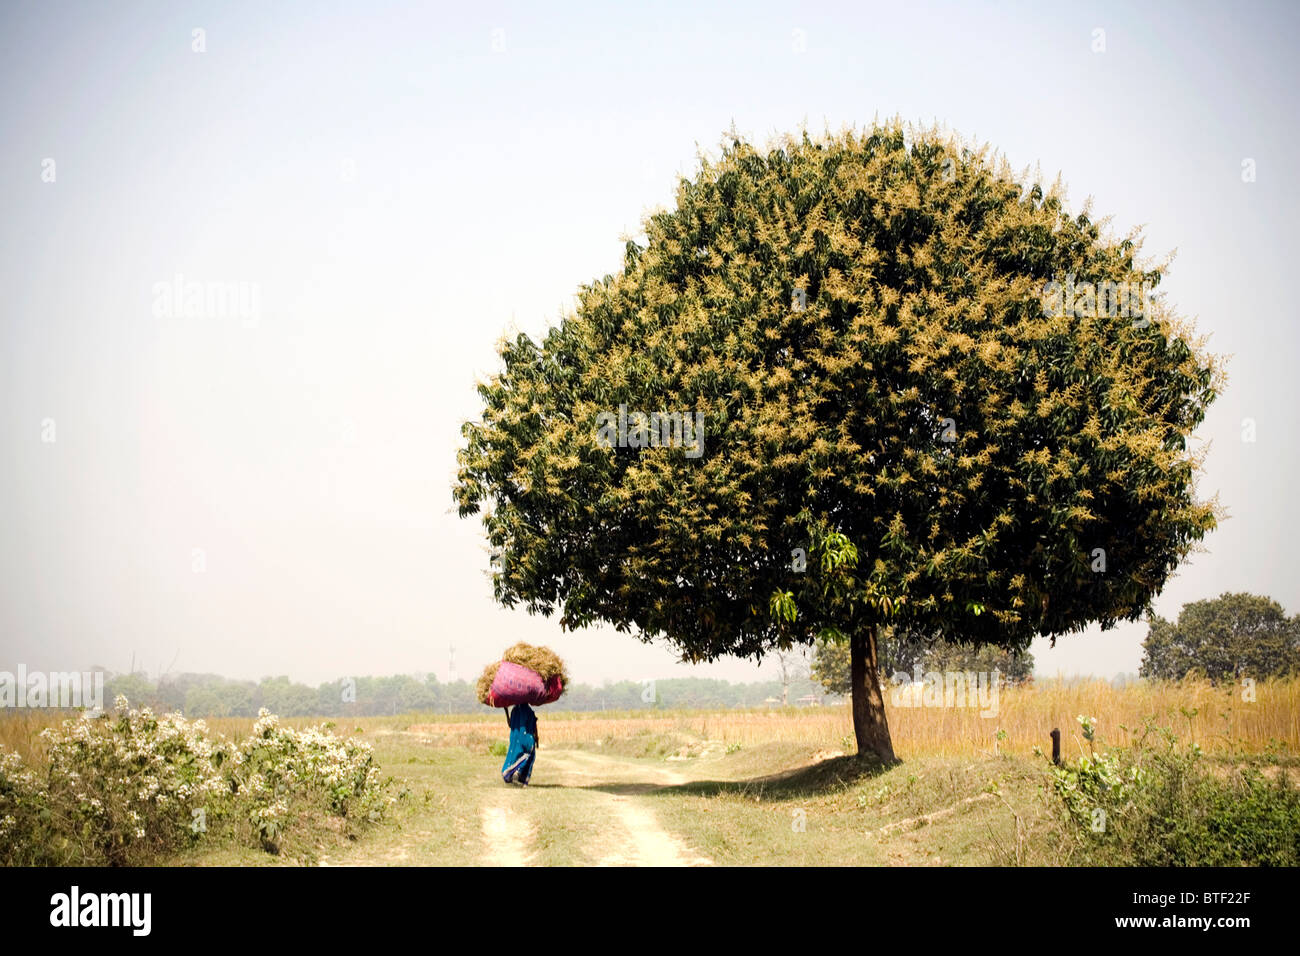 Woman carrying a large bundle of field produce on her head, Lumbini India Nepal border. Stock Photo